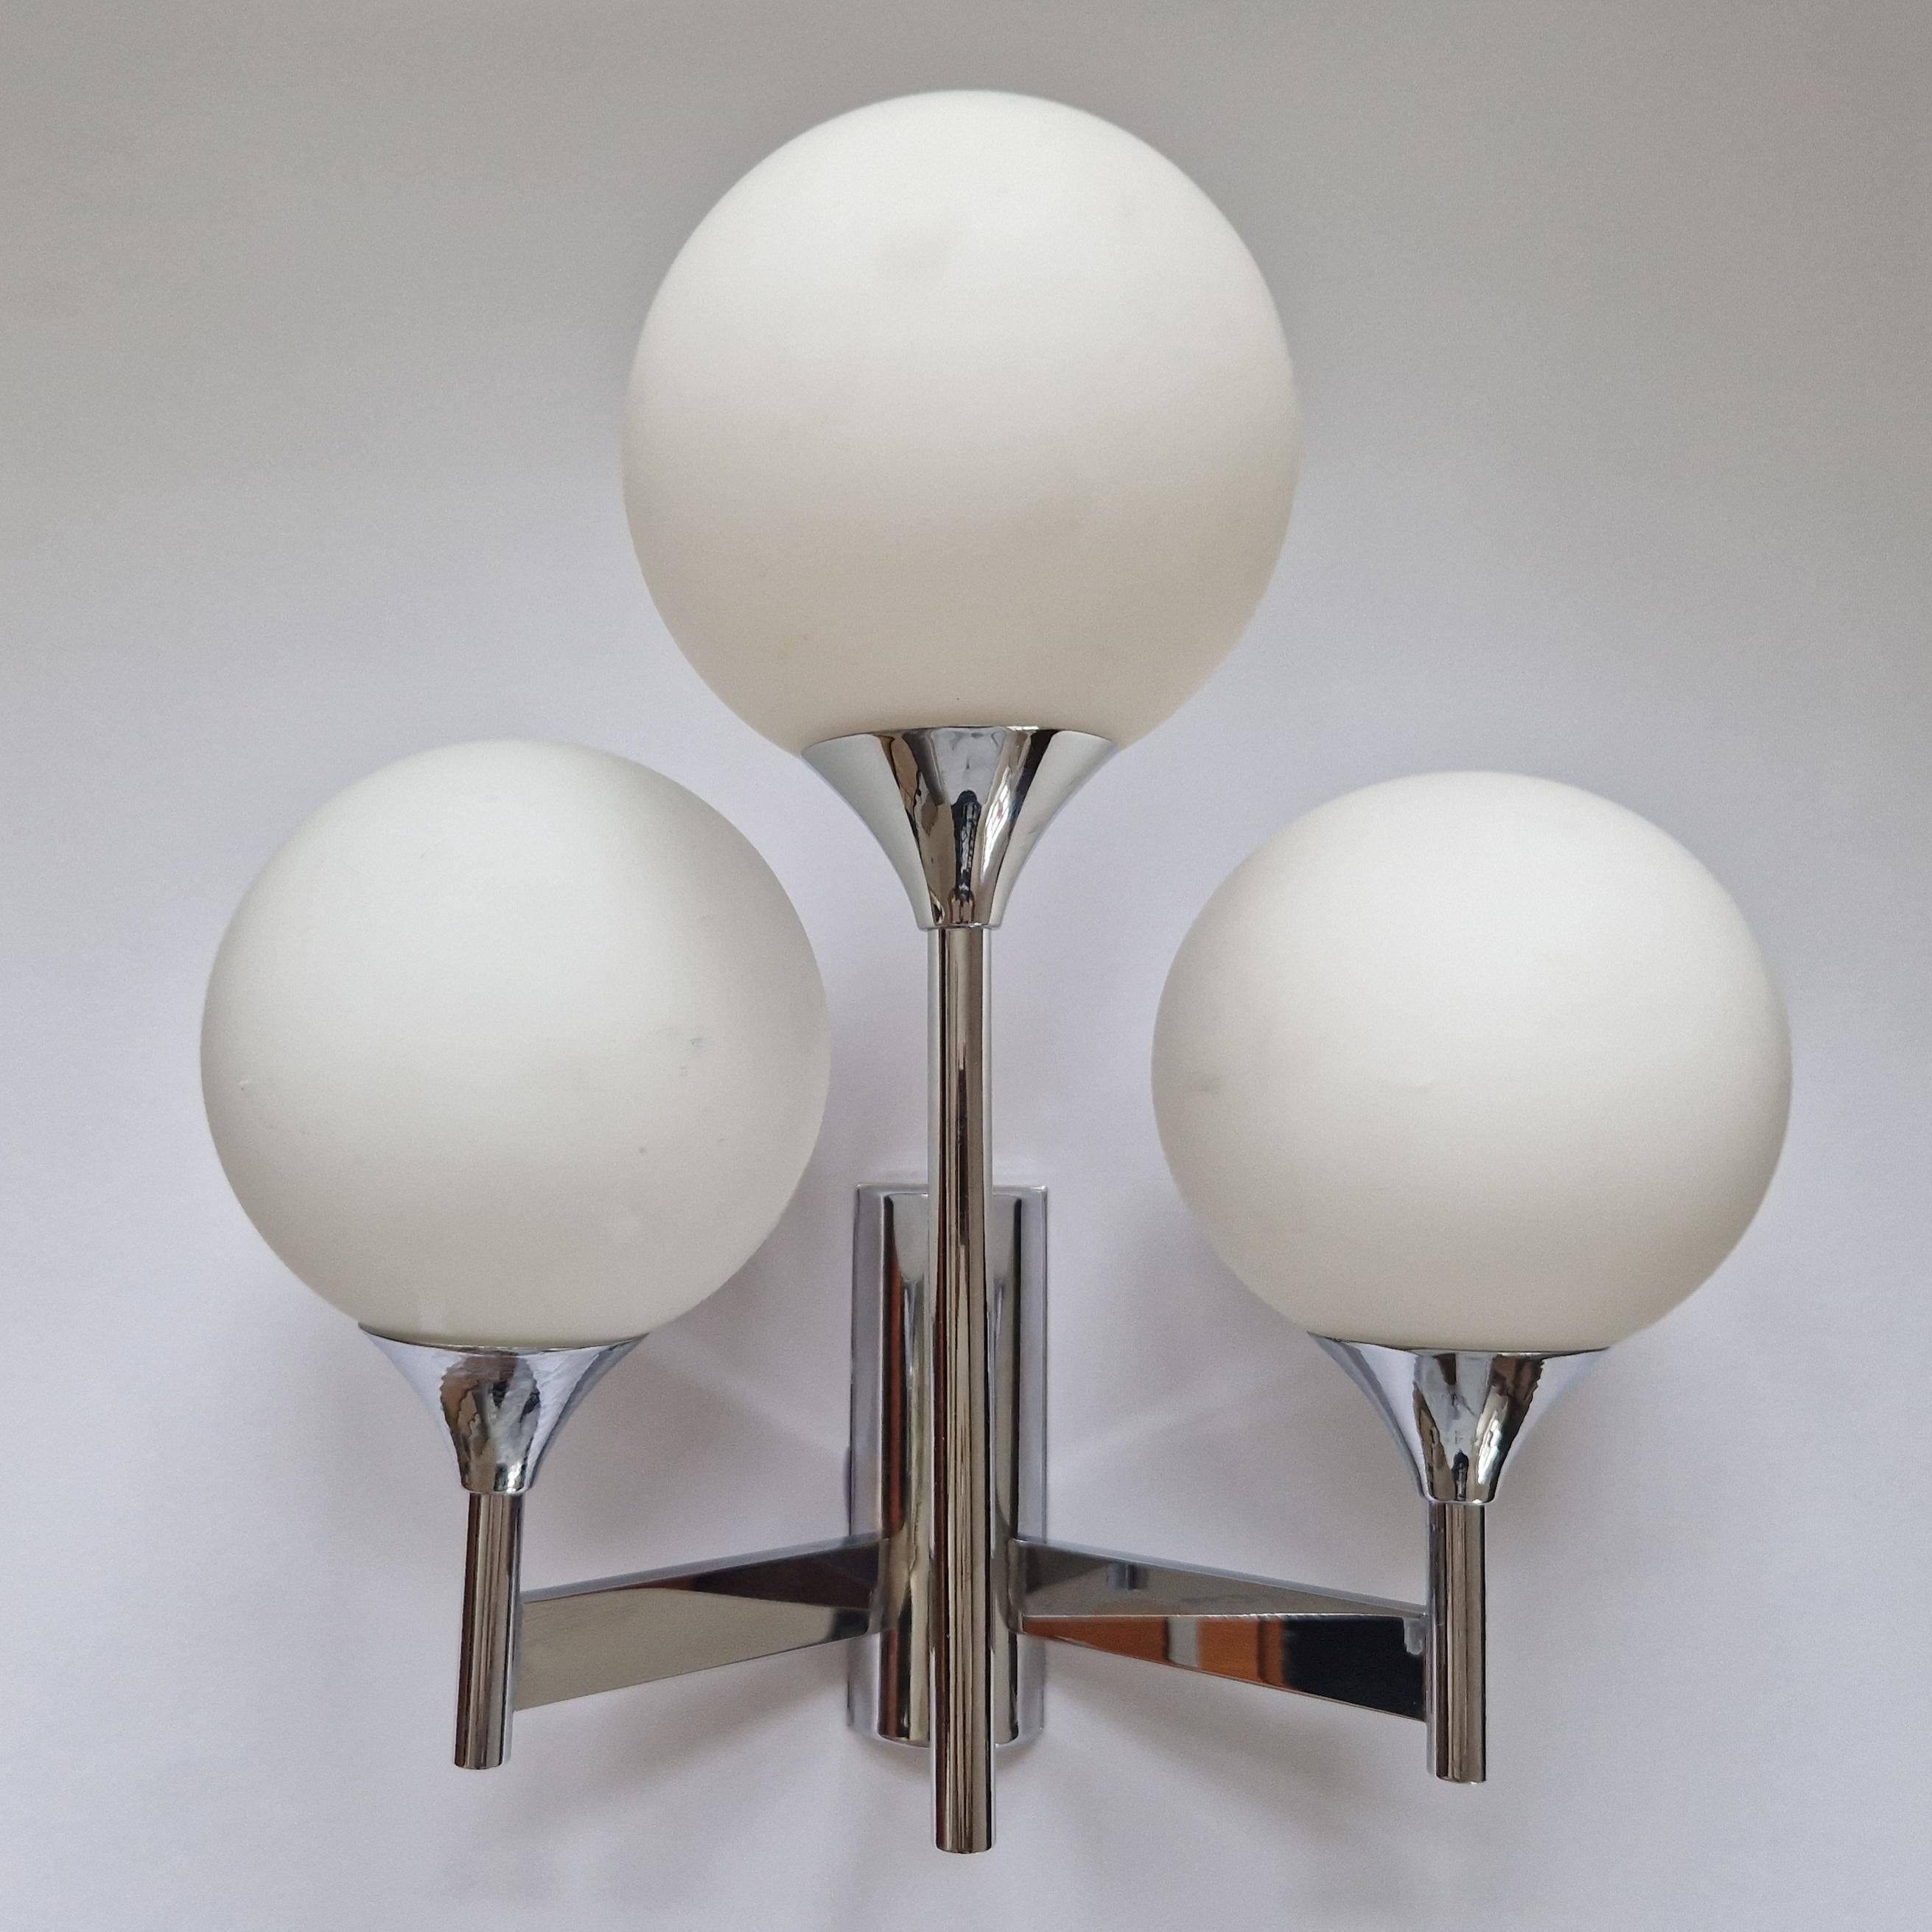 Midcentury Wall Lamp designed by Gaetano  For Sale 1